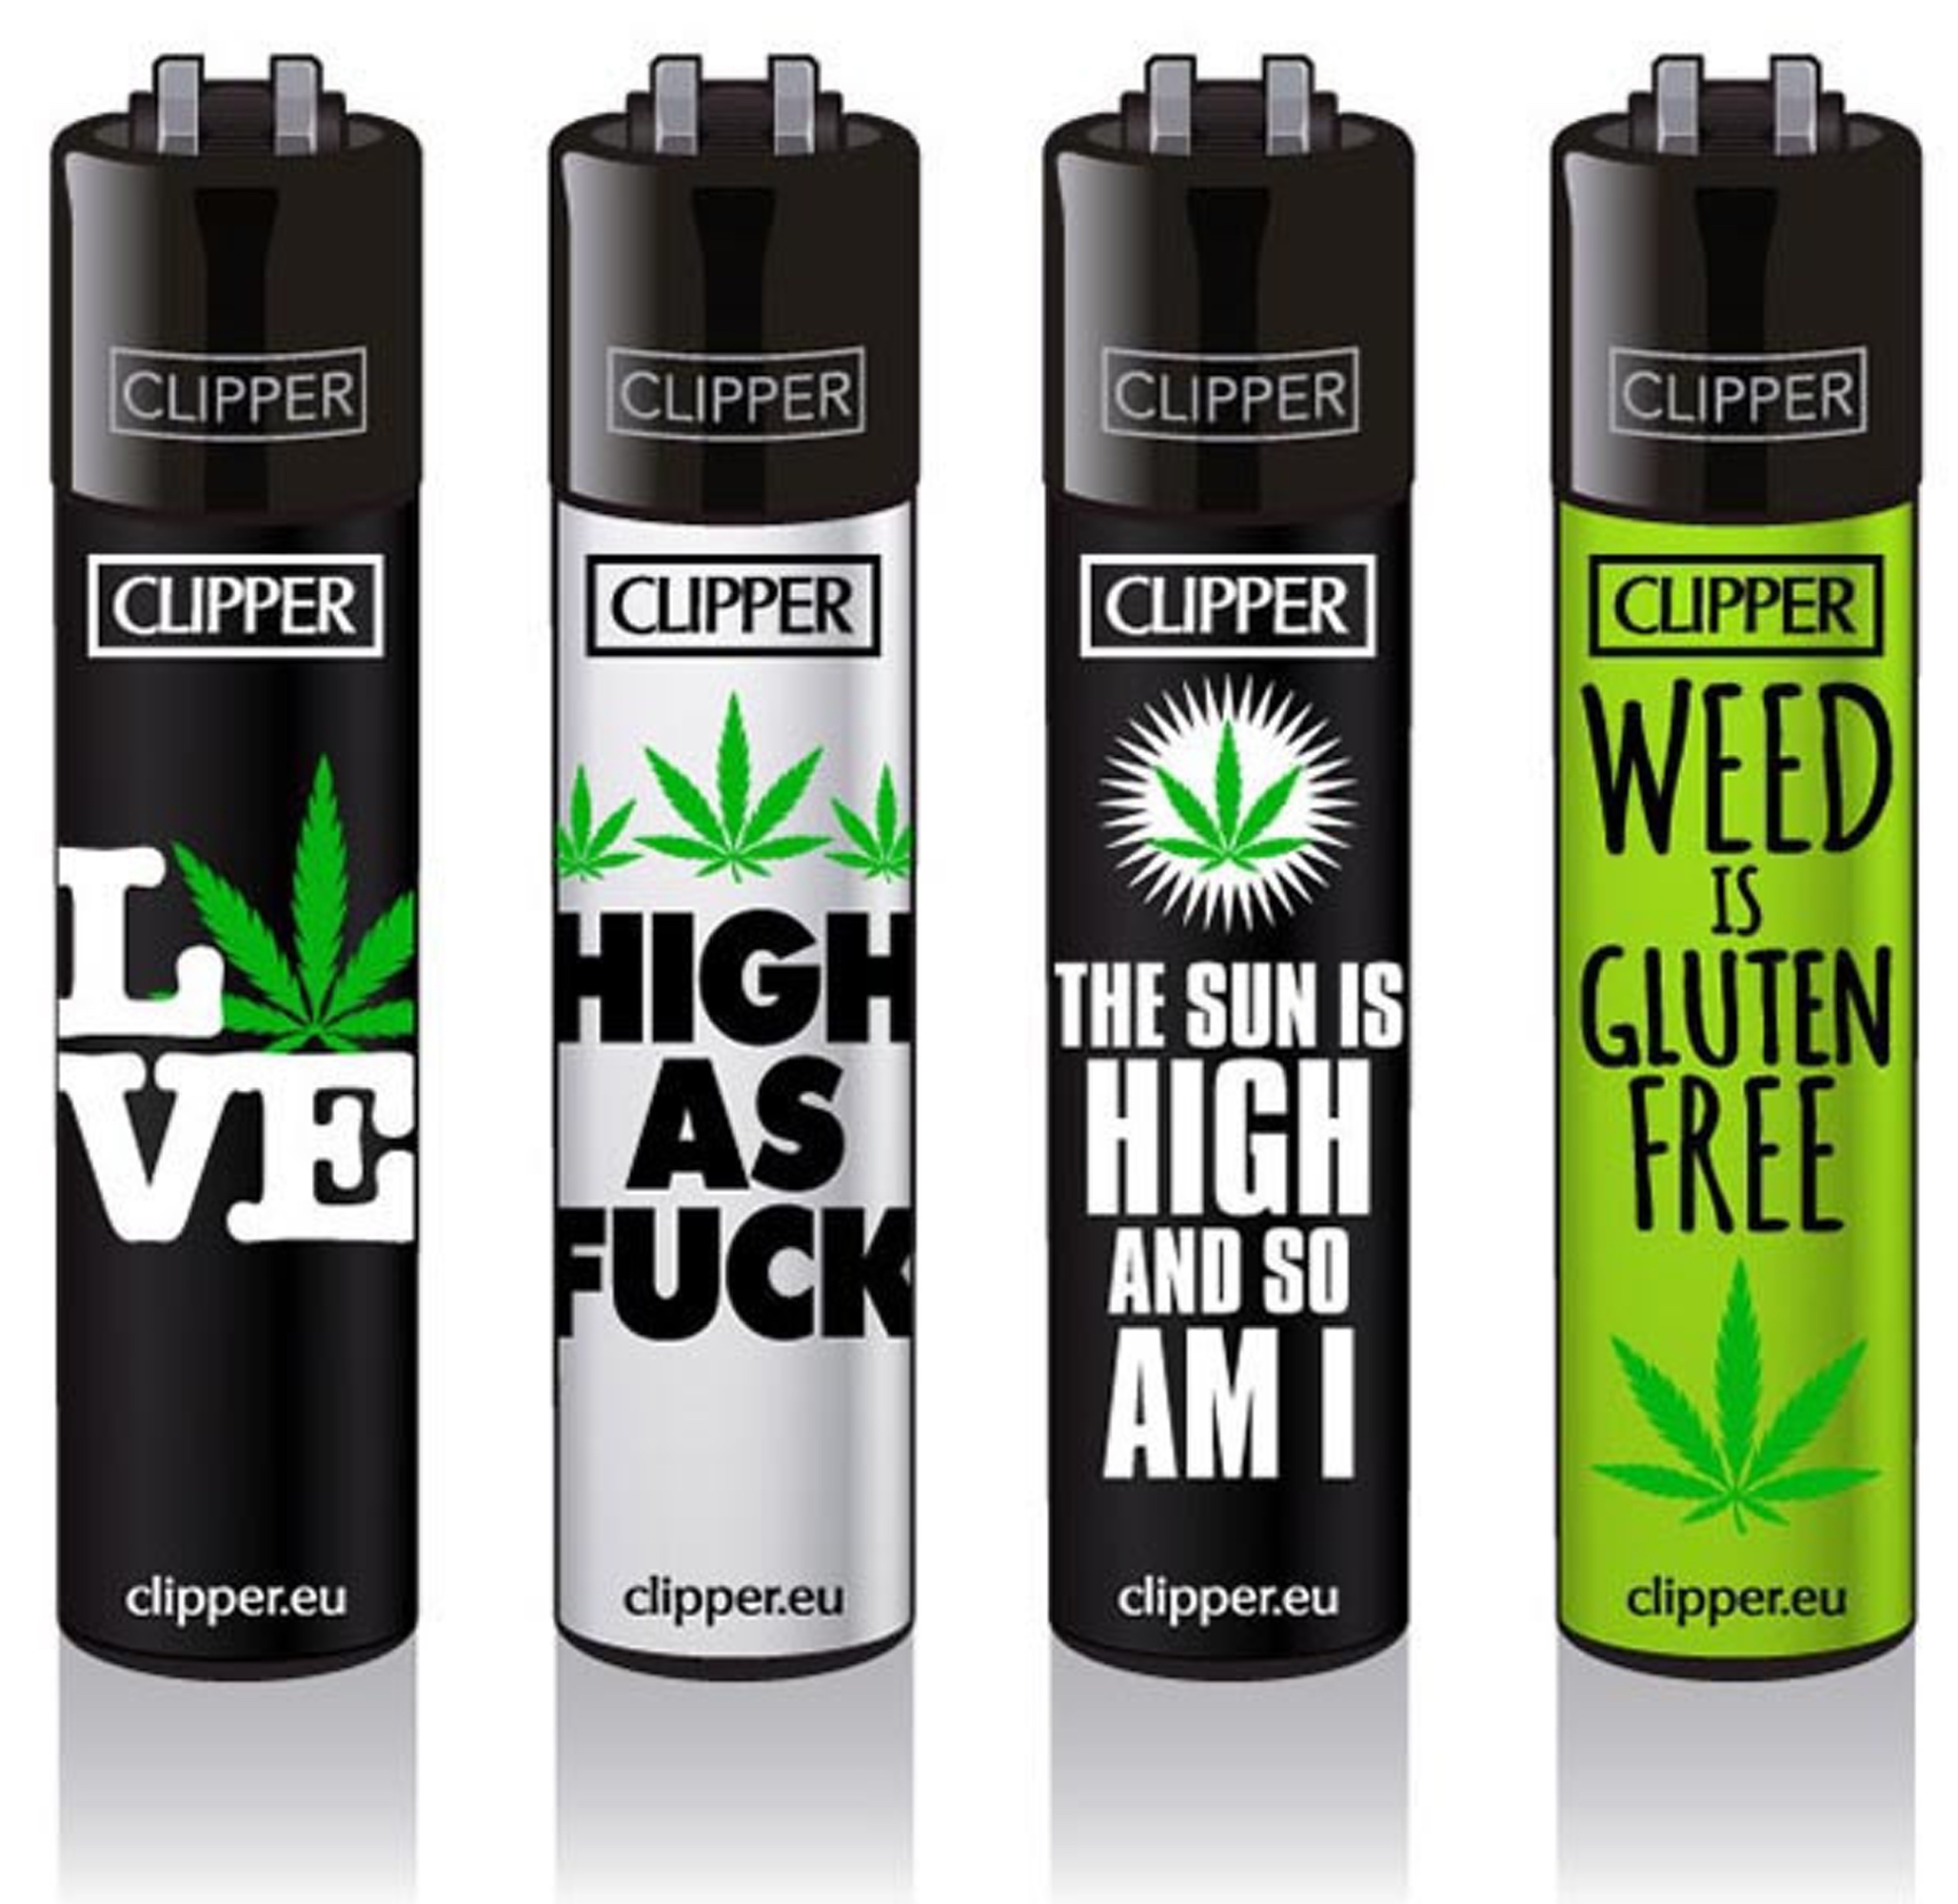 Weed Statements 3 Clipper Lighter